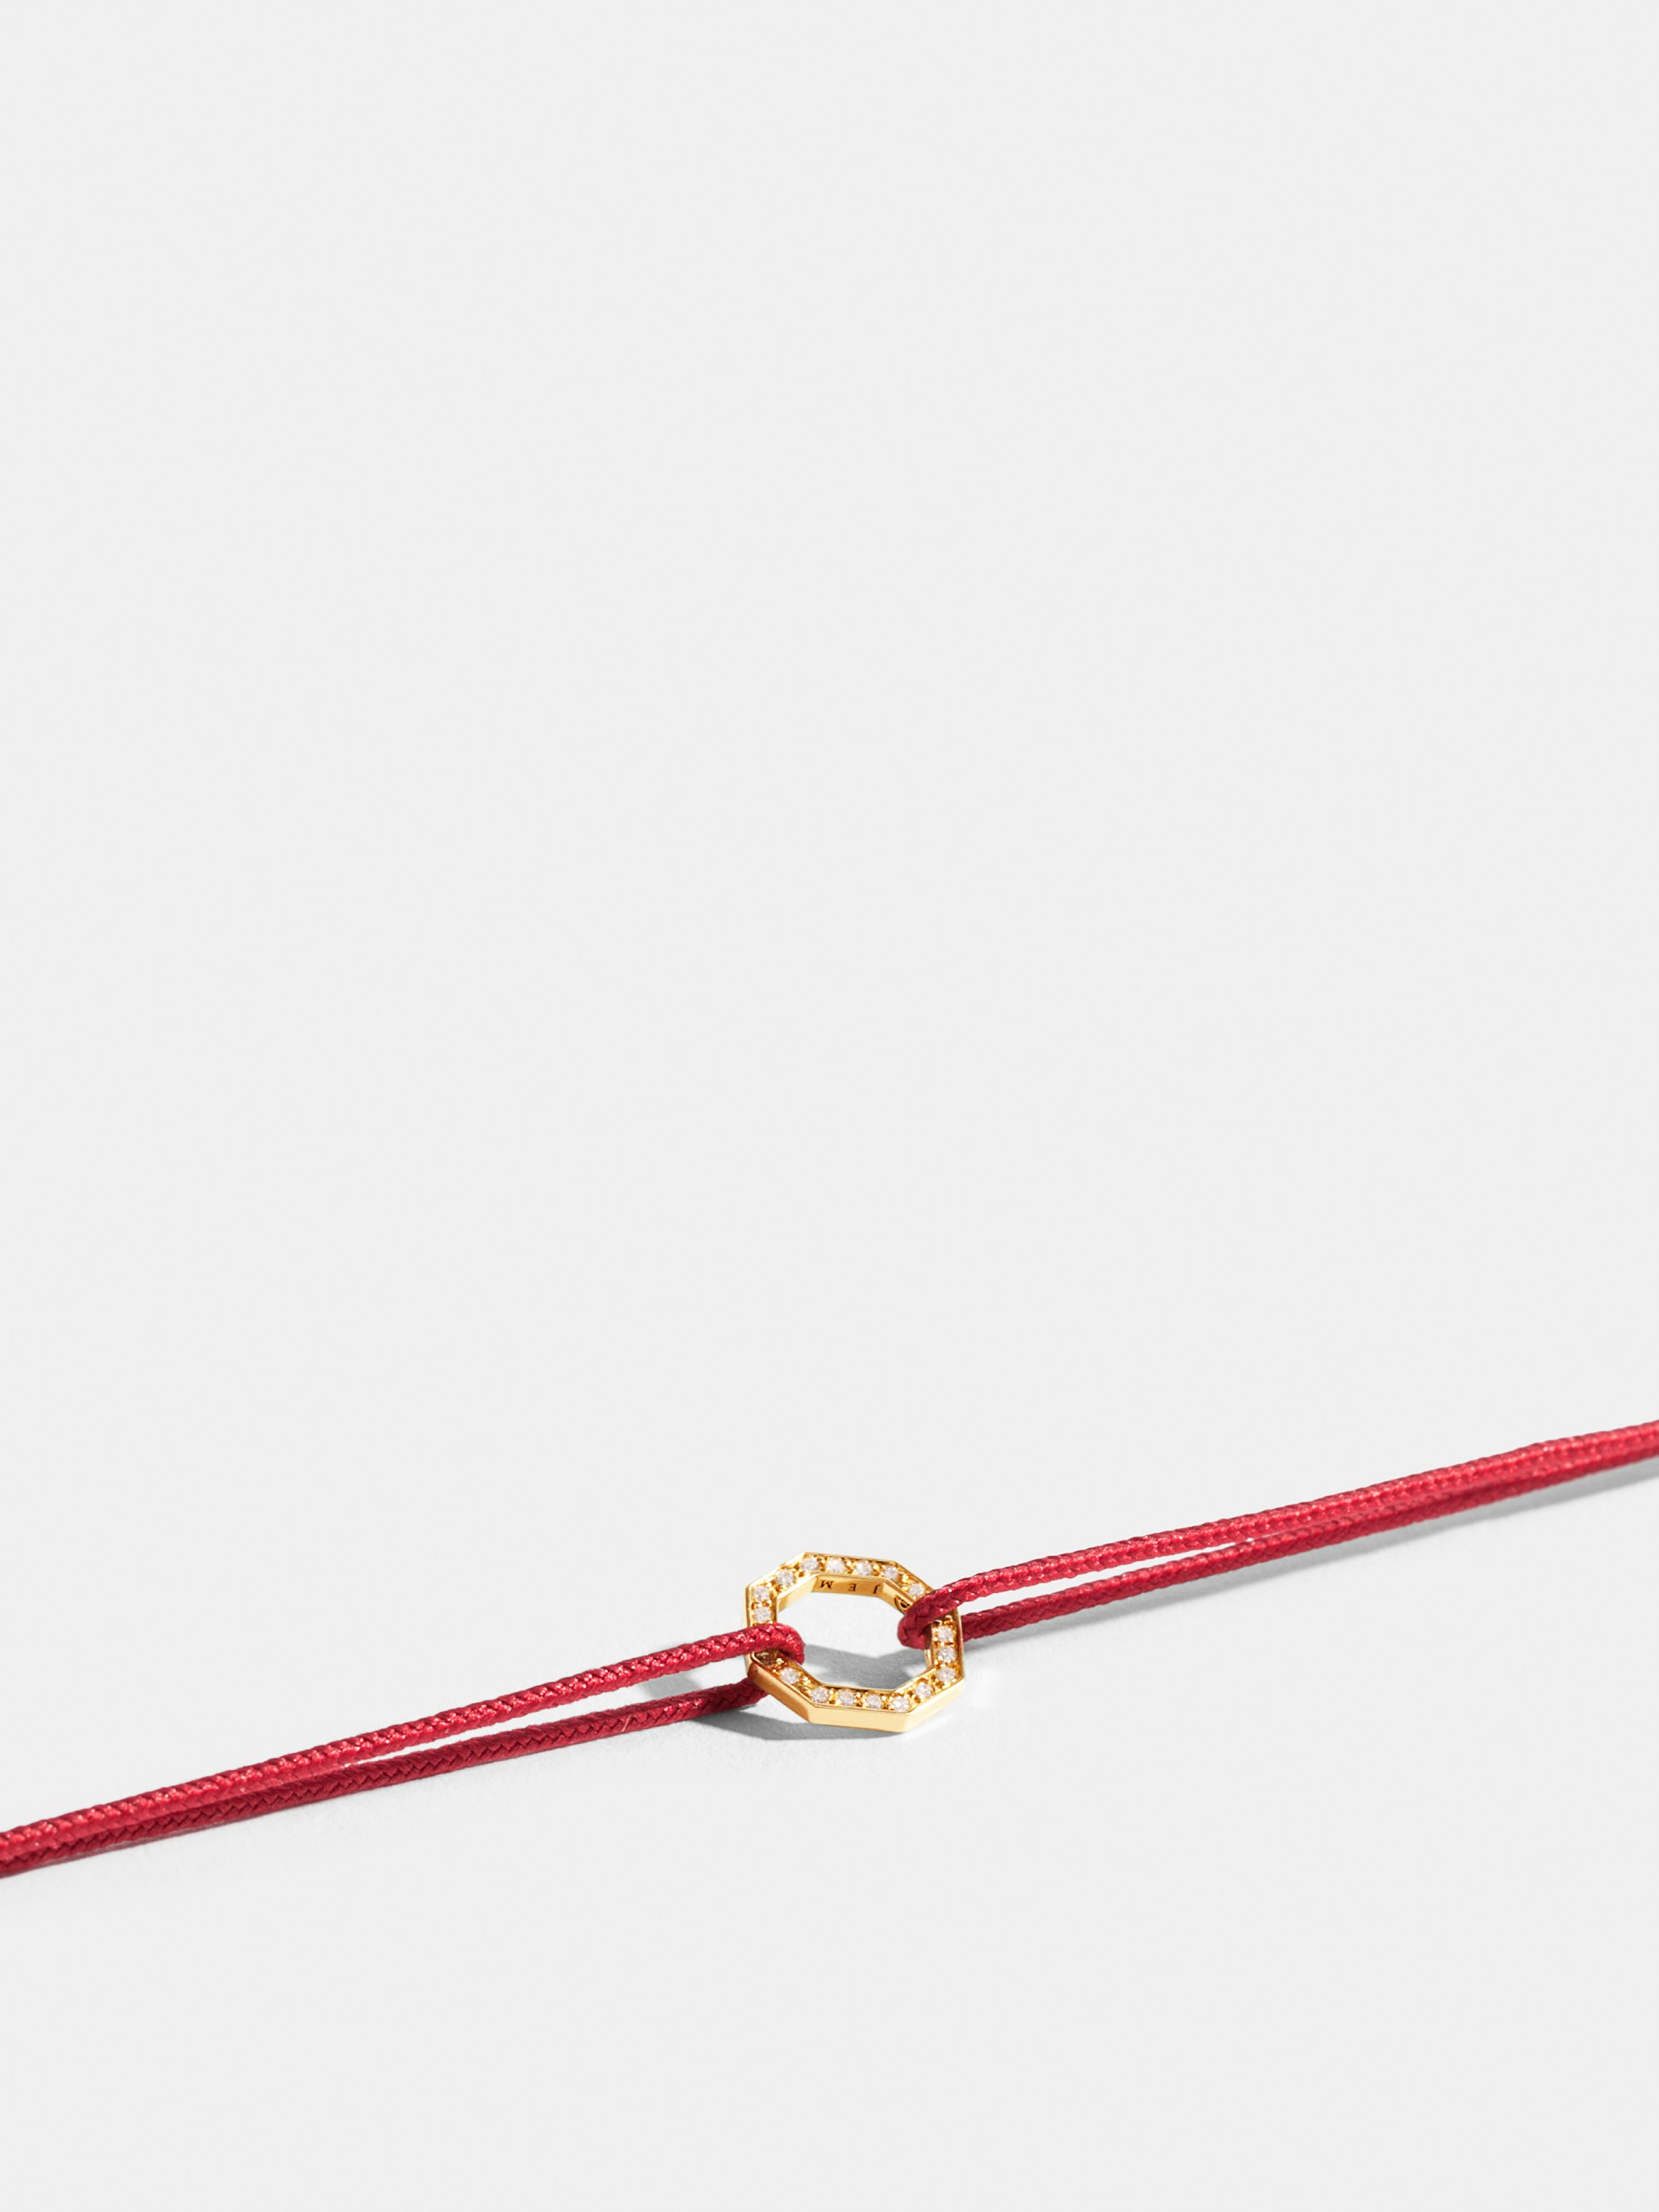 Octogone motif in 18k Fairmined ethical yellow gold, paved with lab-grown diamonds, on a puppy red cord.